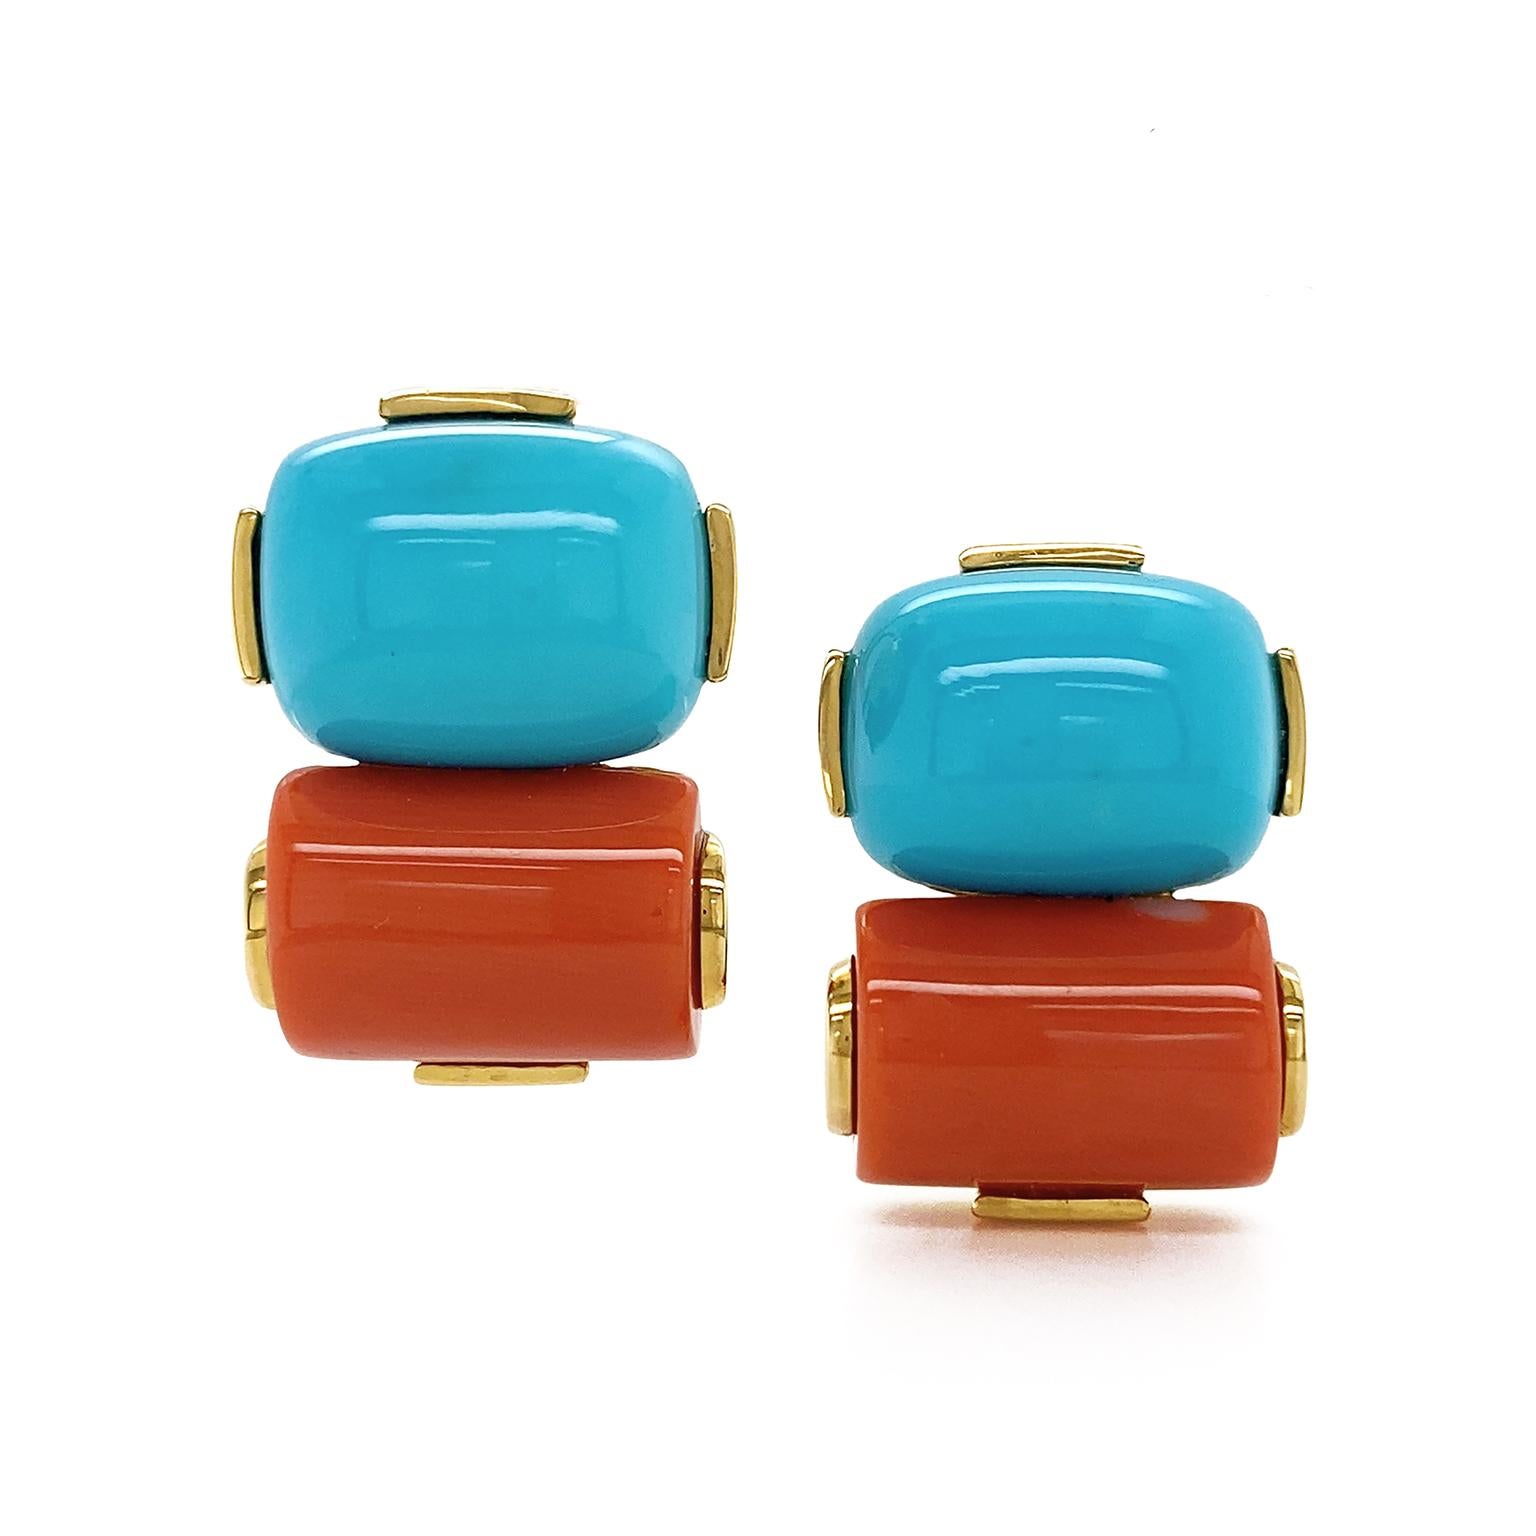 Timeless complementary colors of blue and red are given a modern interpretation for these earrings. Above is turquoise, carved in a cushion cabochon. Below is red coral, in a rectangle cabochon. 18k yellow gold prongs both secure and bring out the